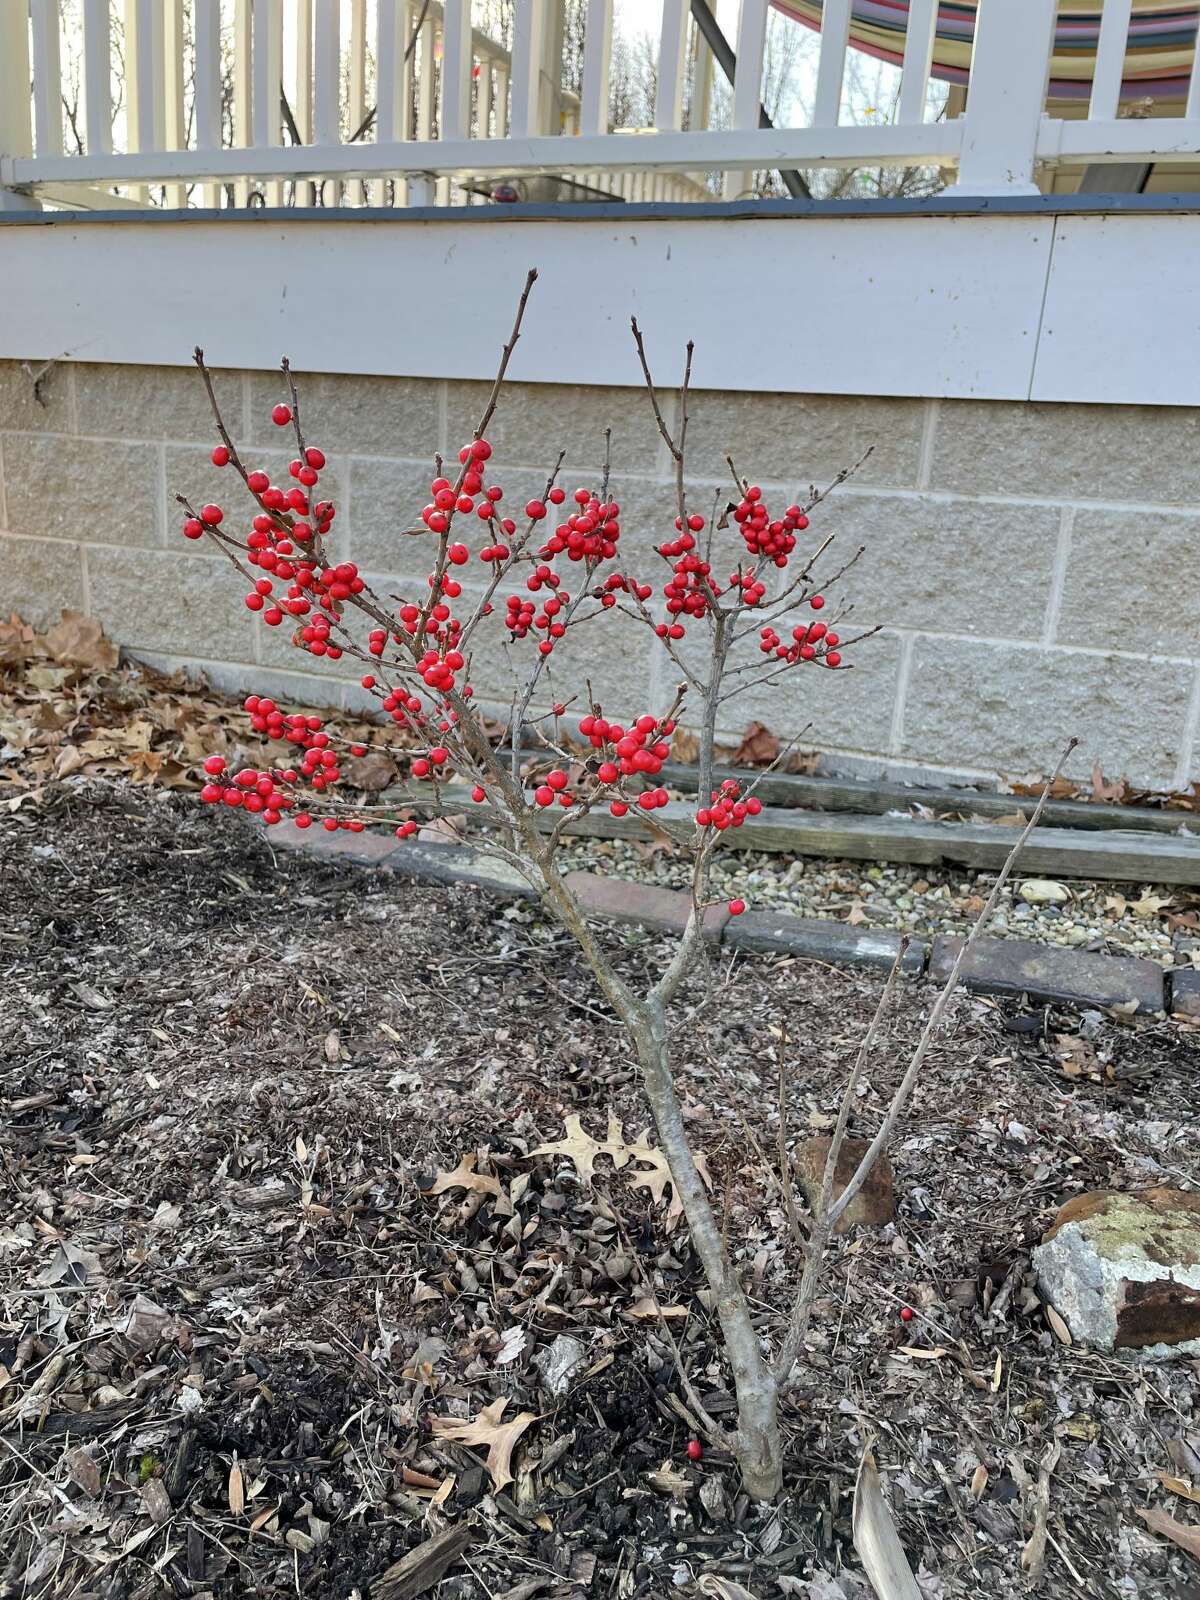 Winterberries can provide a pop of color during the drab winter months.